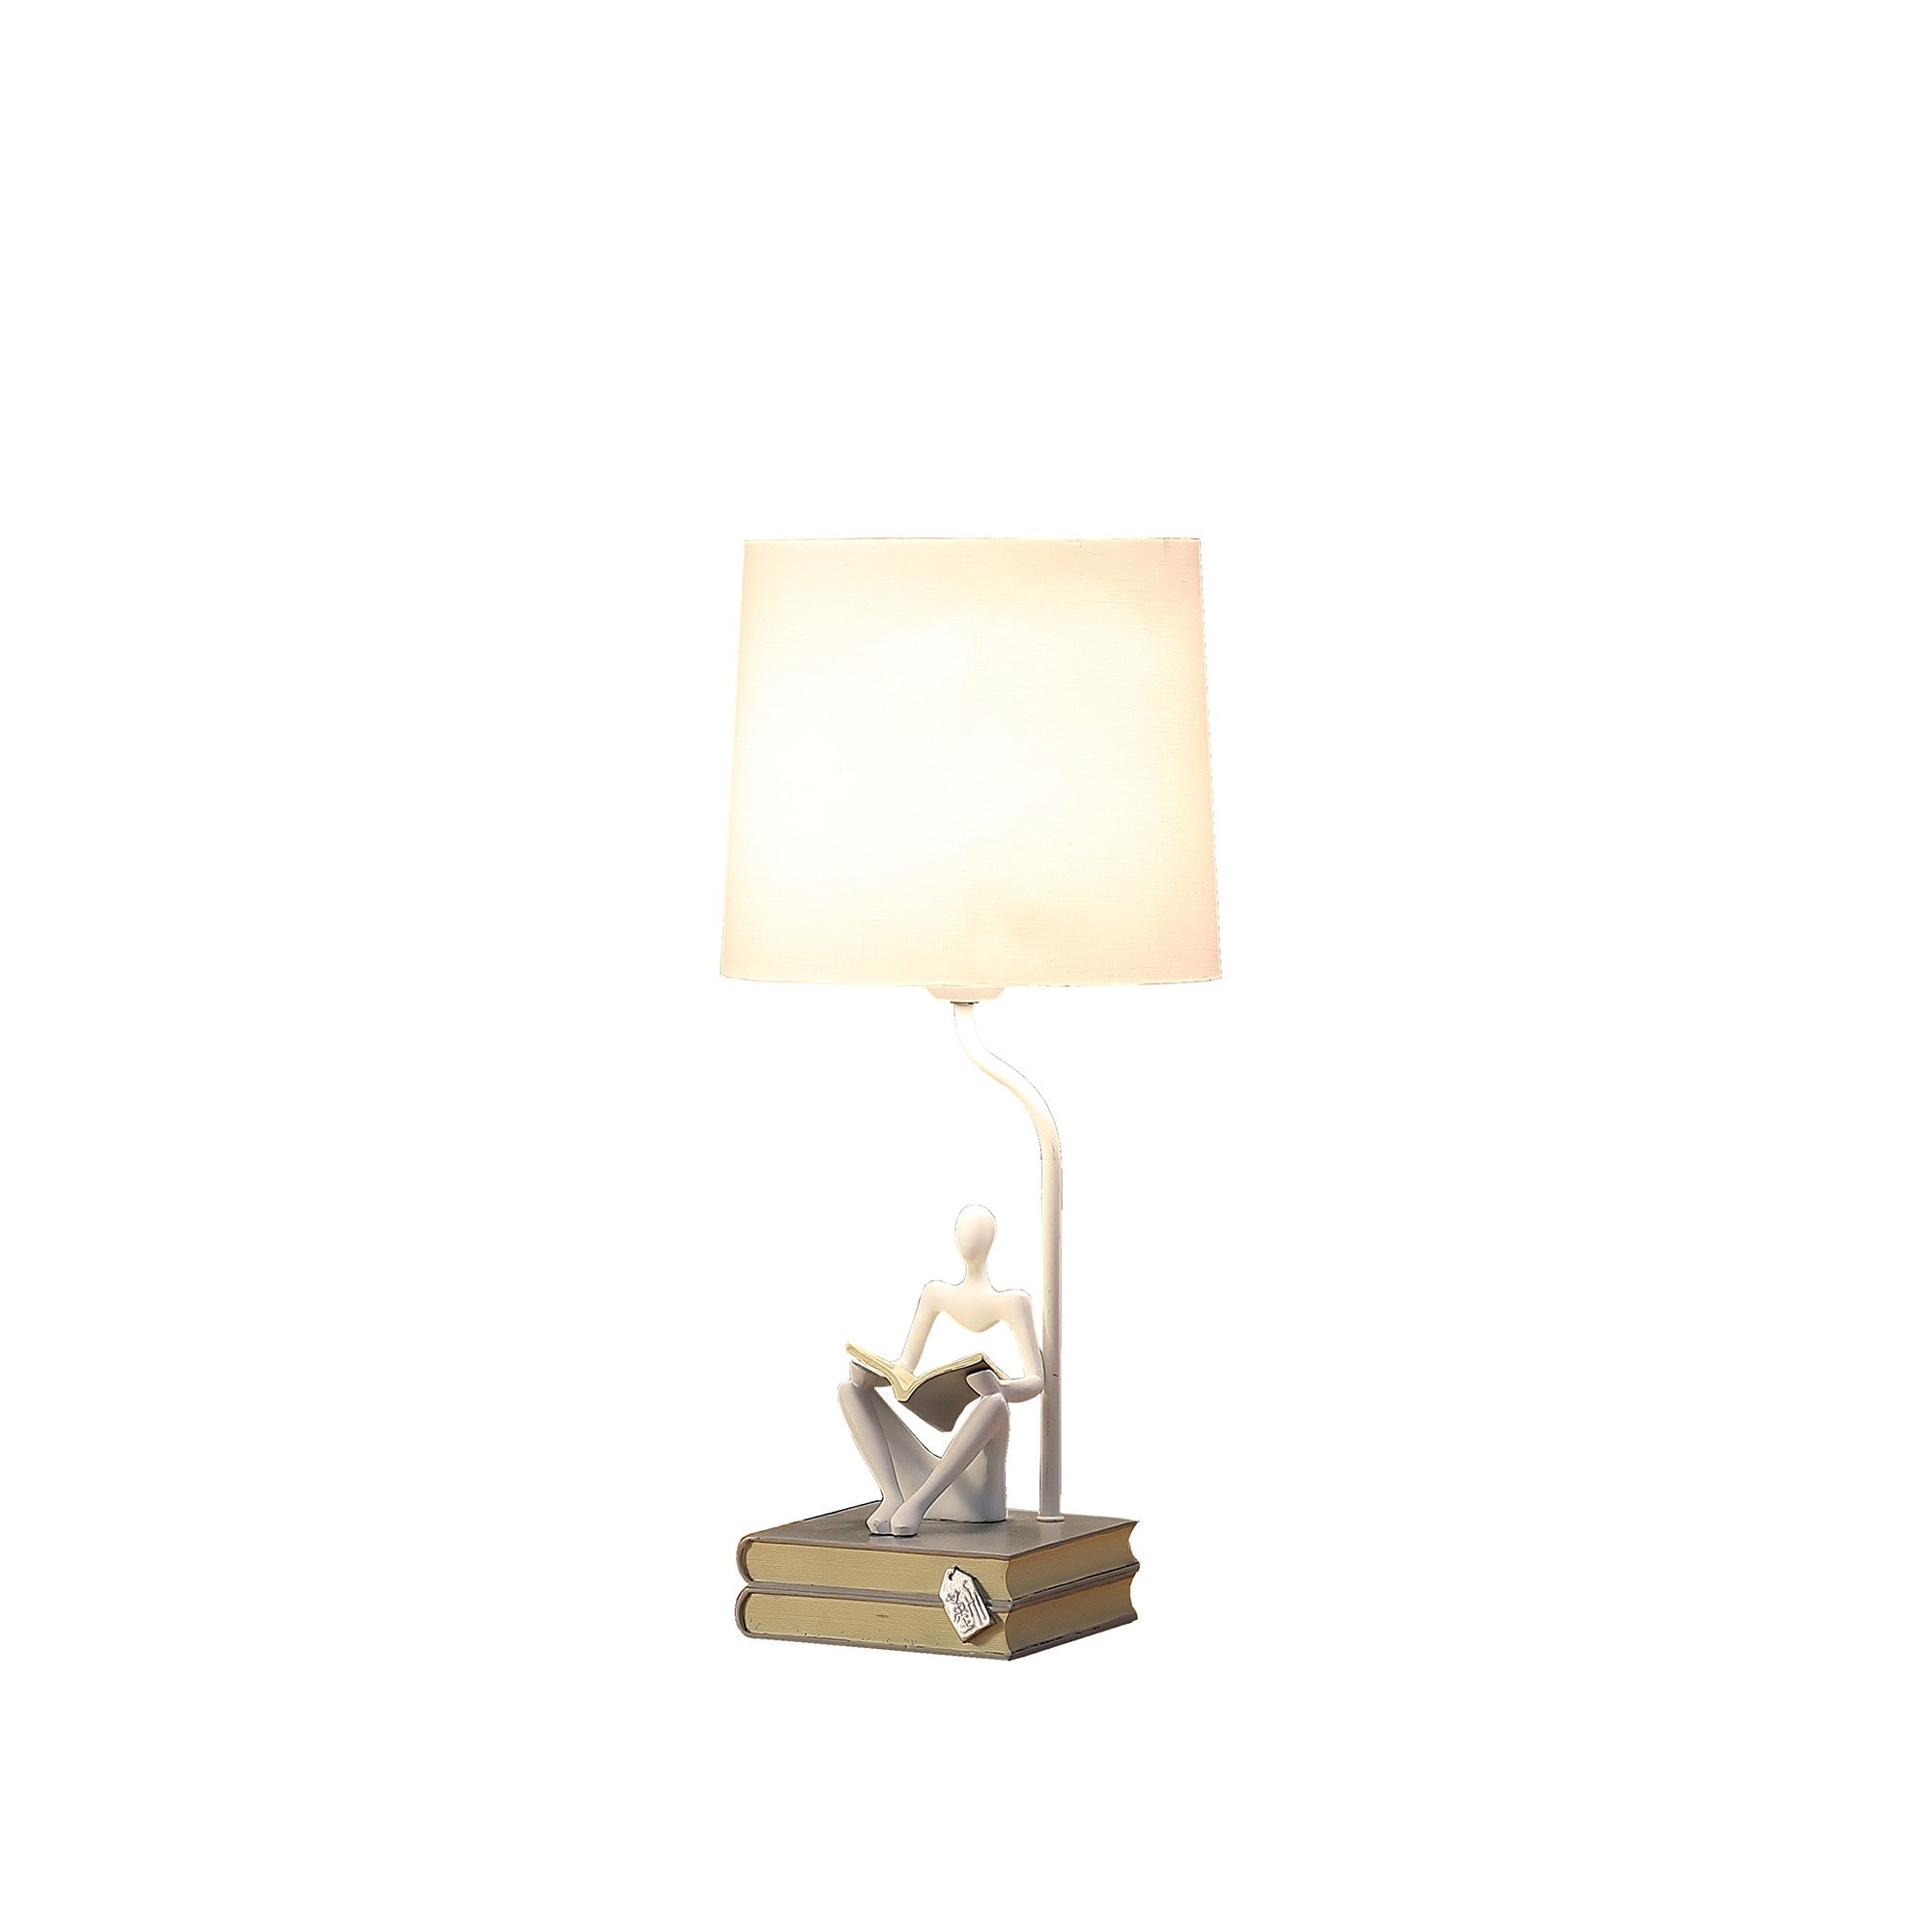 21" White Table Lamp With White Globe Shade